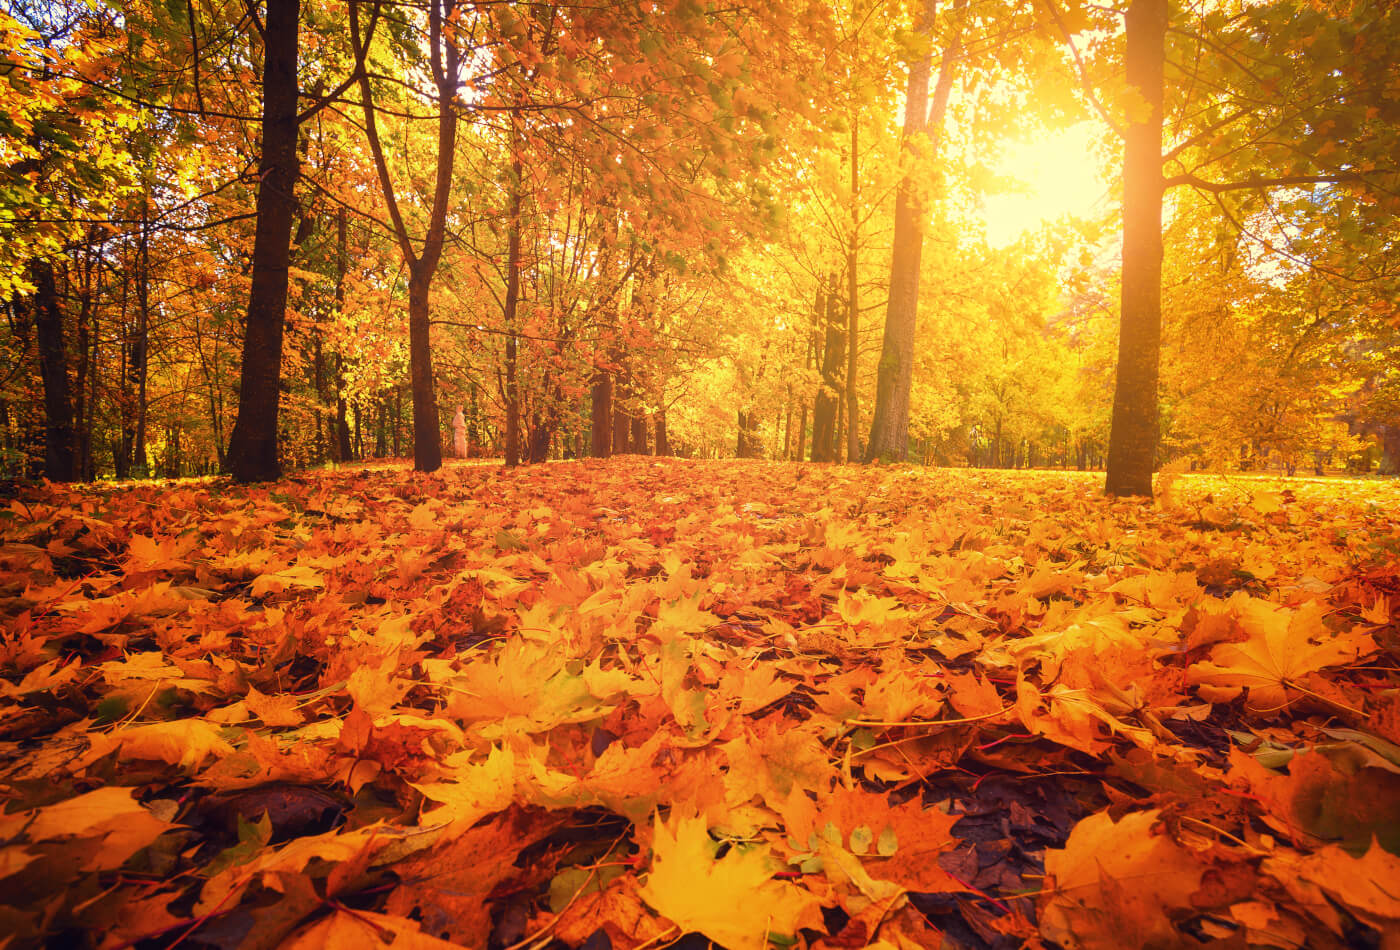 Autumn UK: 9 Signs of Autumn to Look For - Sykes Holiday Cottages